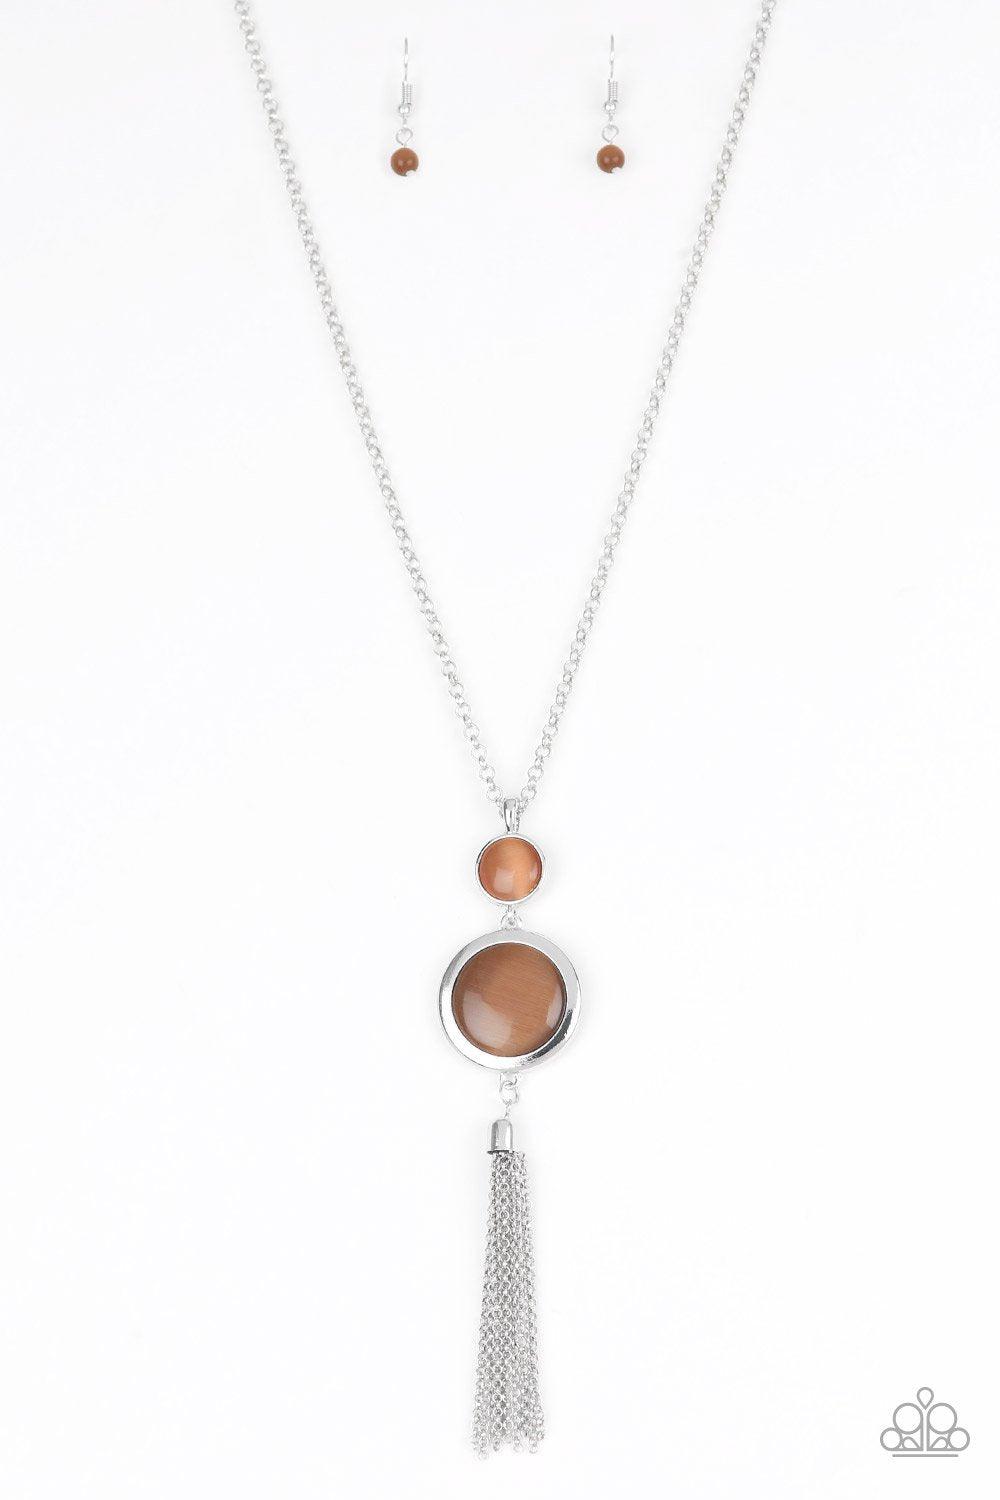 Have Some Common SENSEI Brown Moonstone Necklace and matching Earrings - Paparazzi Accessories-CarasShop.com - $5 Jewelry by Cara Jewels